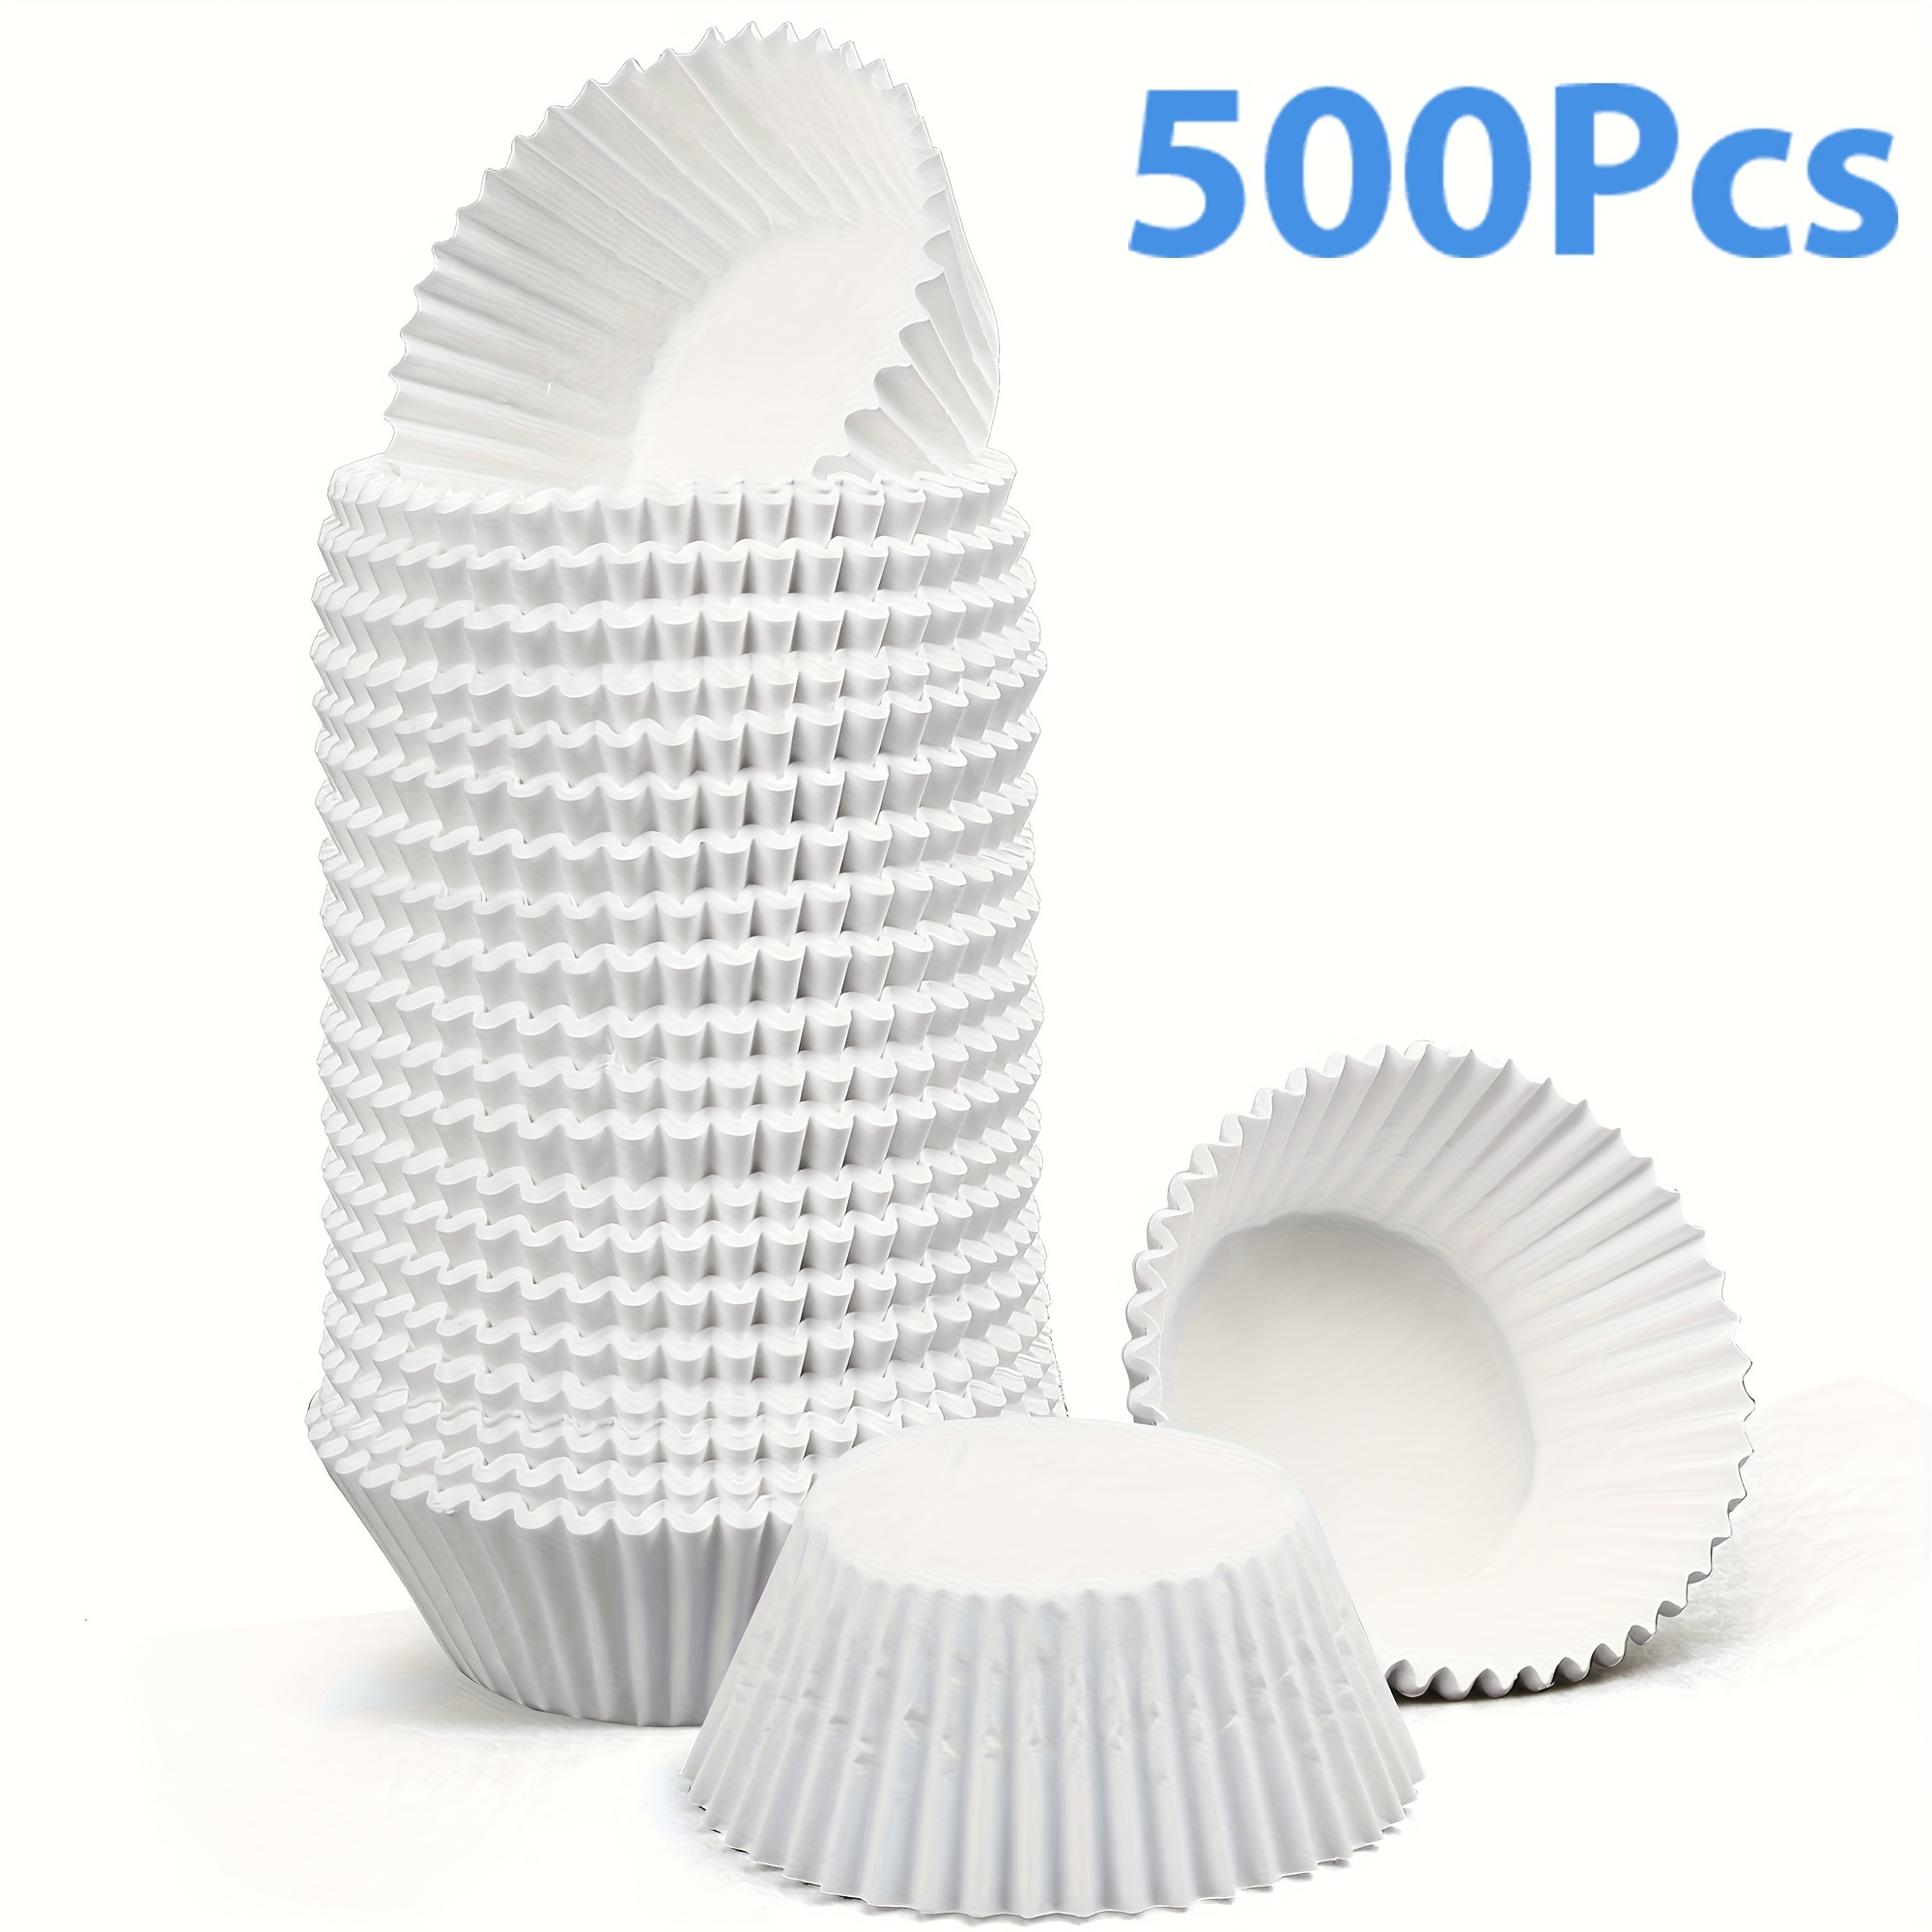 

500pcs Bulk White Cupcake Liners, Standard Size/mini Size Paper Baking Cups, Greaseproof Muffin Liners, No Smell, Small Cupcake Wrappers